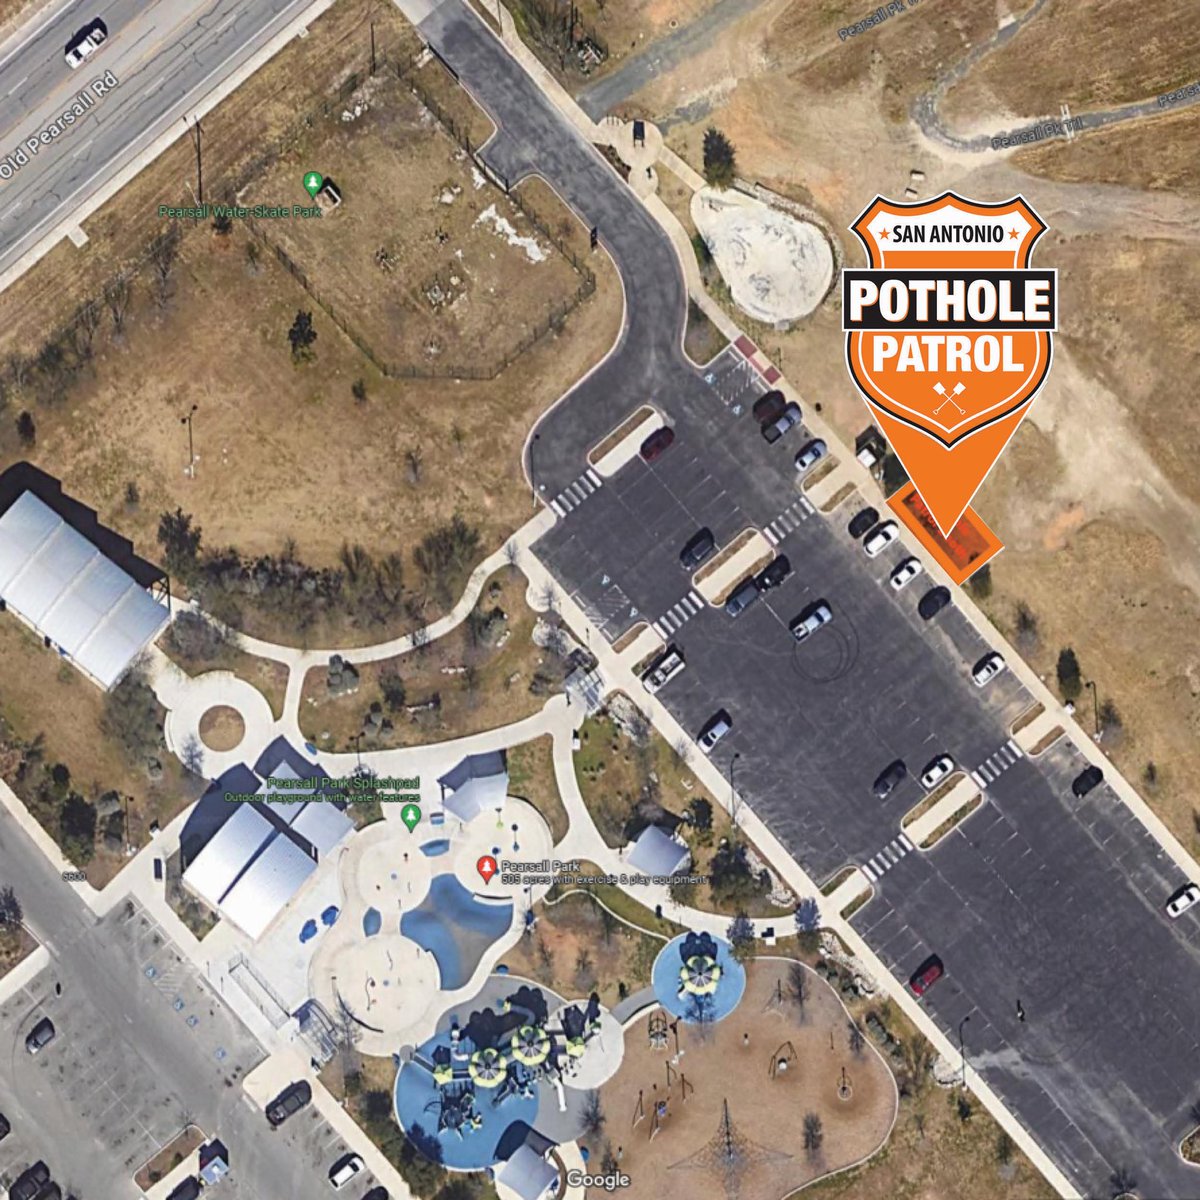 🎉We're far from finished! Come out tmrw to Pearsall Park and get your hands on an exclusive #PotholePatrol medal. ✨🪅🎖️Don't forget, if you spot a pothole, make sure to report it! Dial 3-1-1 or utilize the 311sa app. (Check the map for the giveaway spot)🎉